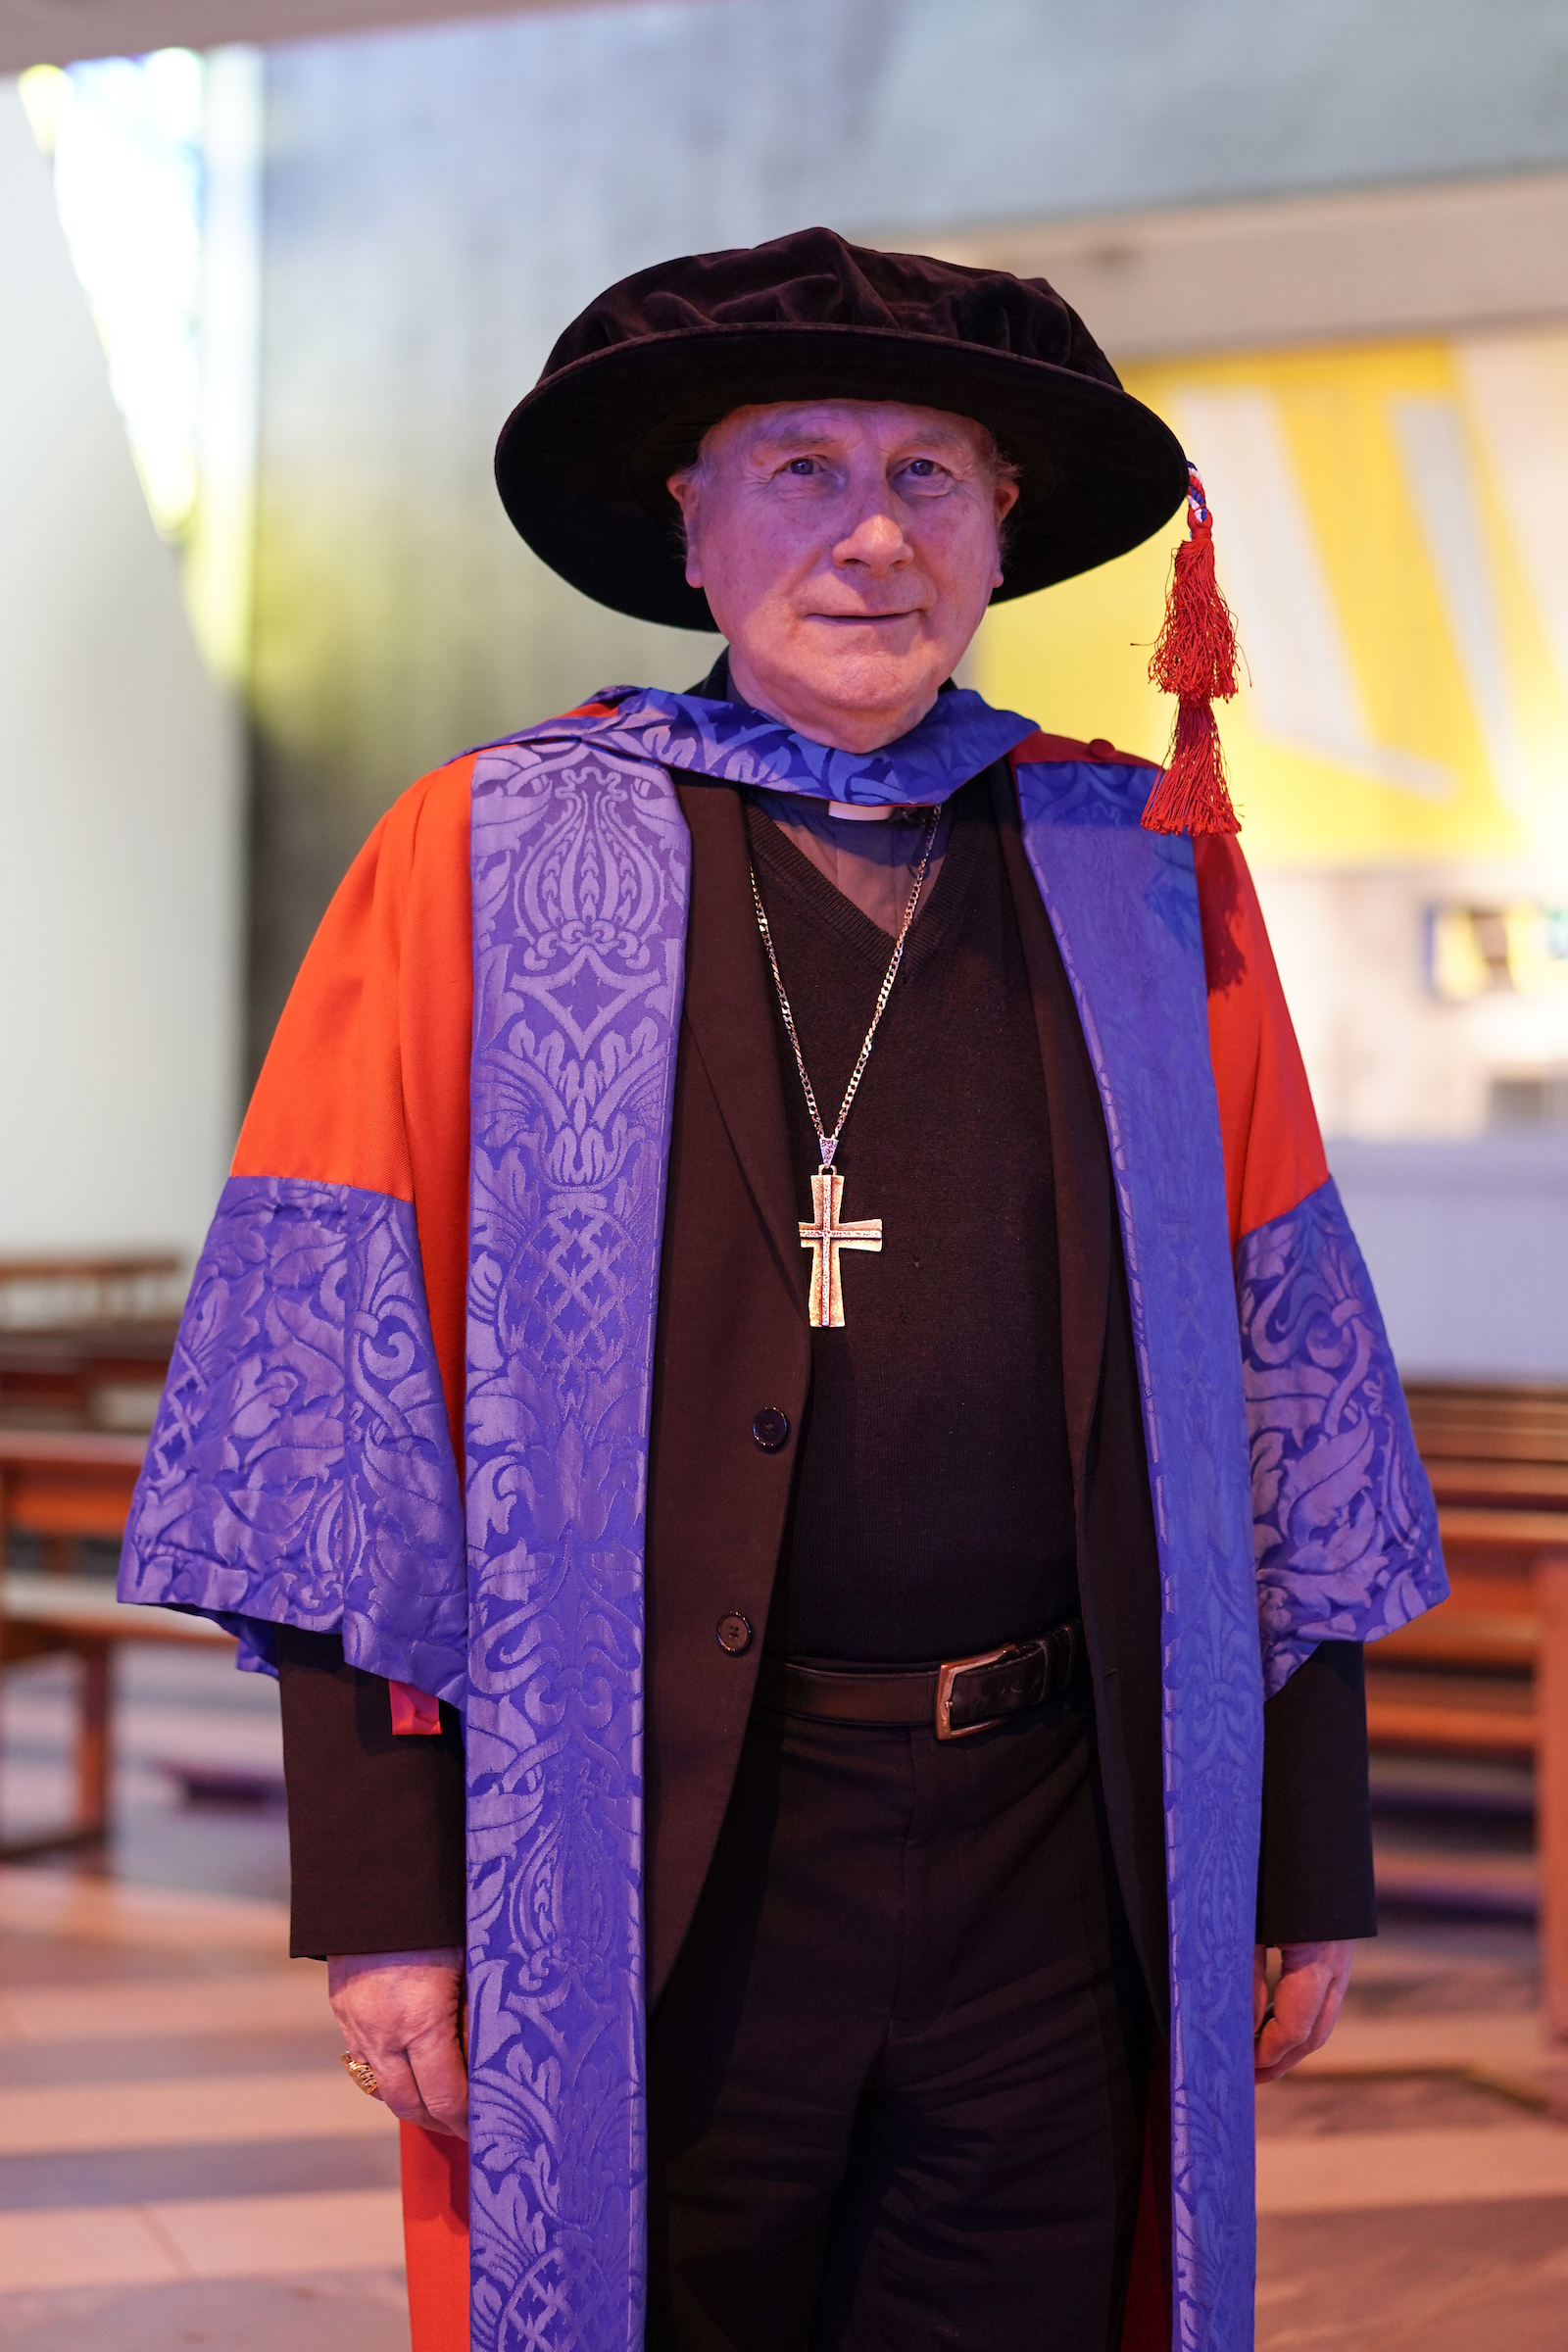 Cardinal fitzgerald receiving doctorate in the cathedral